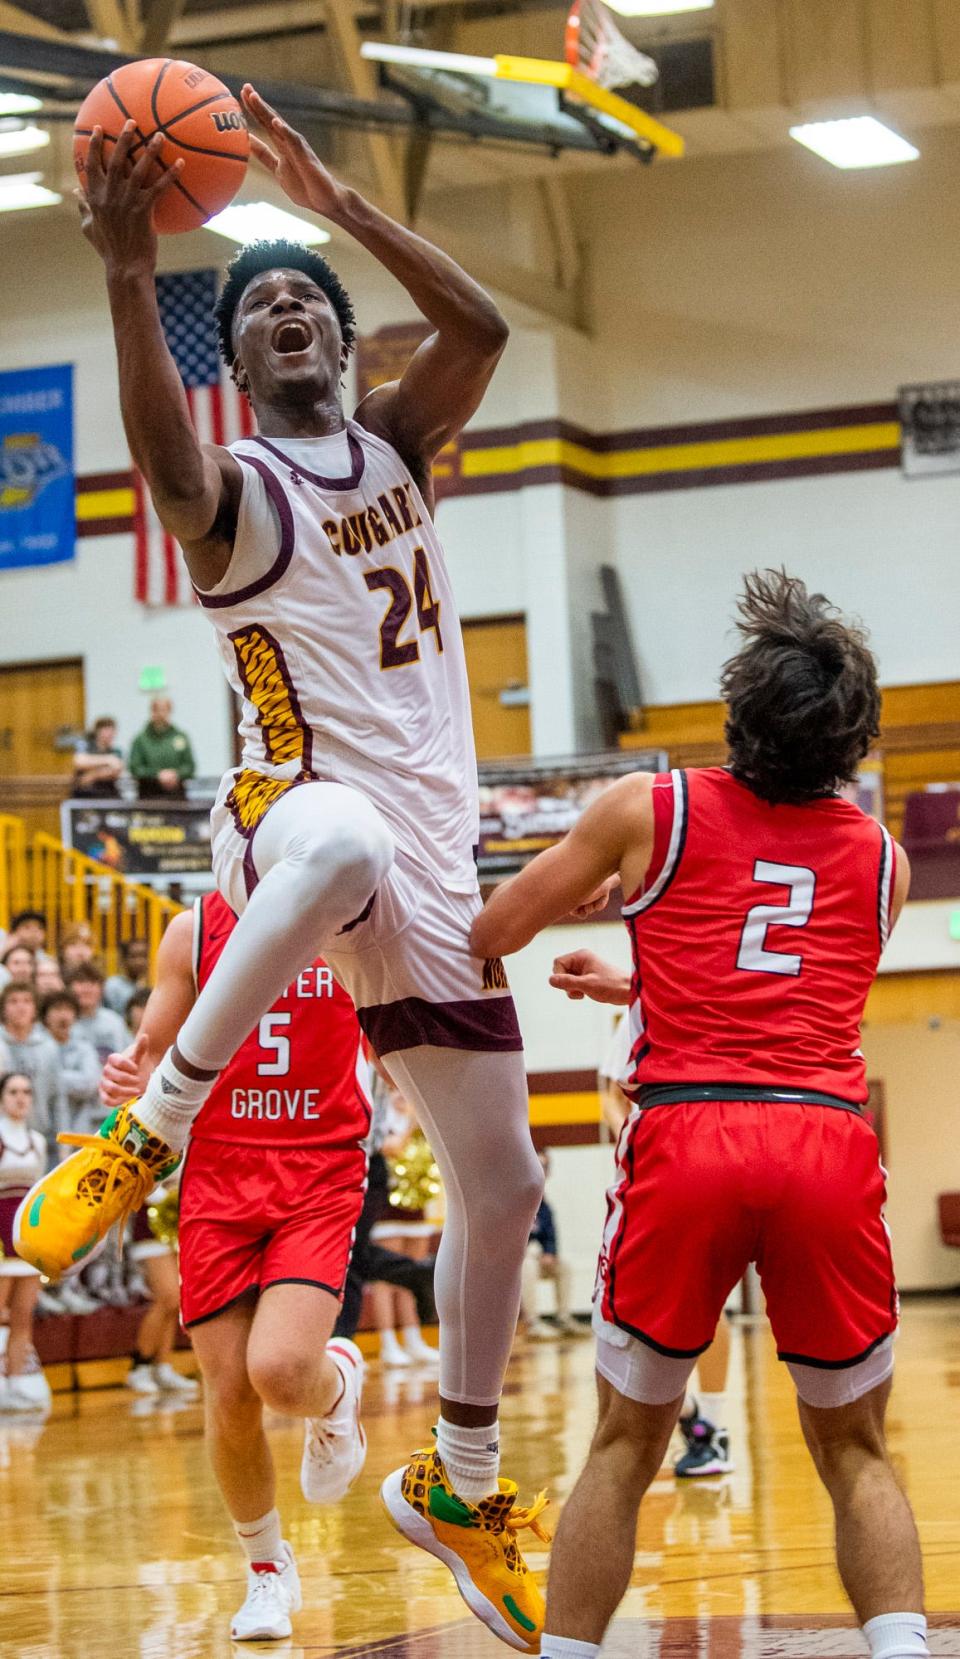 Bloomington North's JaQualon Roberts (24) shoots past Center Grove's Owen Baker (2) during the Bloomington North versus Center Grove boys' basketball game at Bloomington High School North on Friday, Dec. 2, 2022.